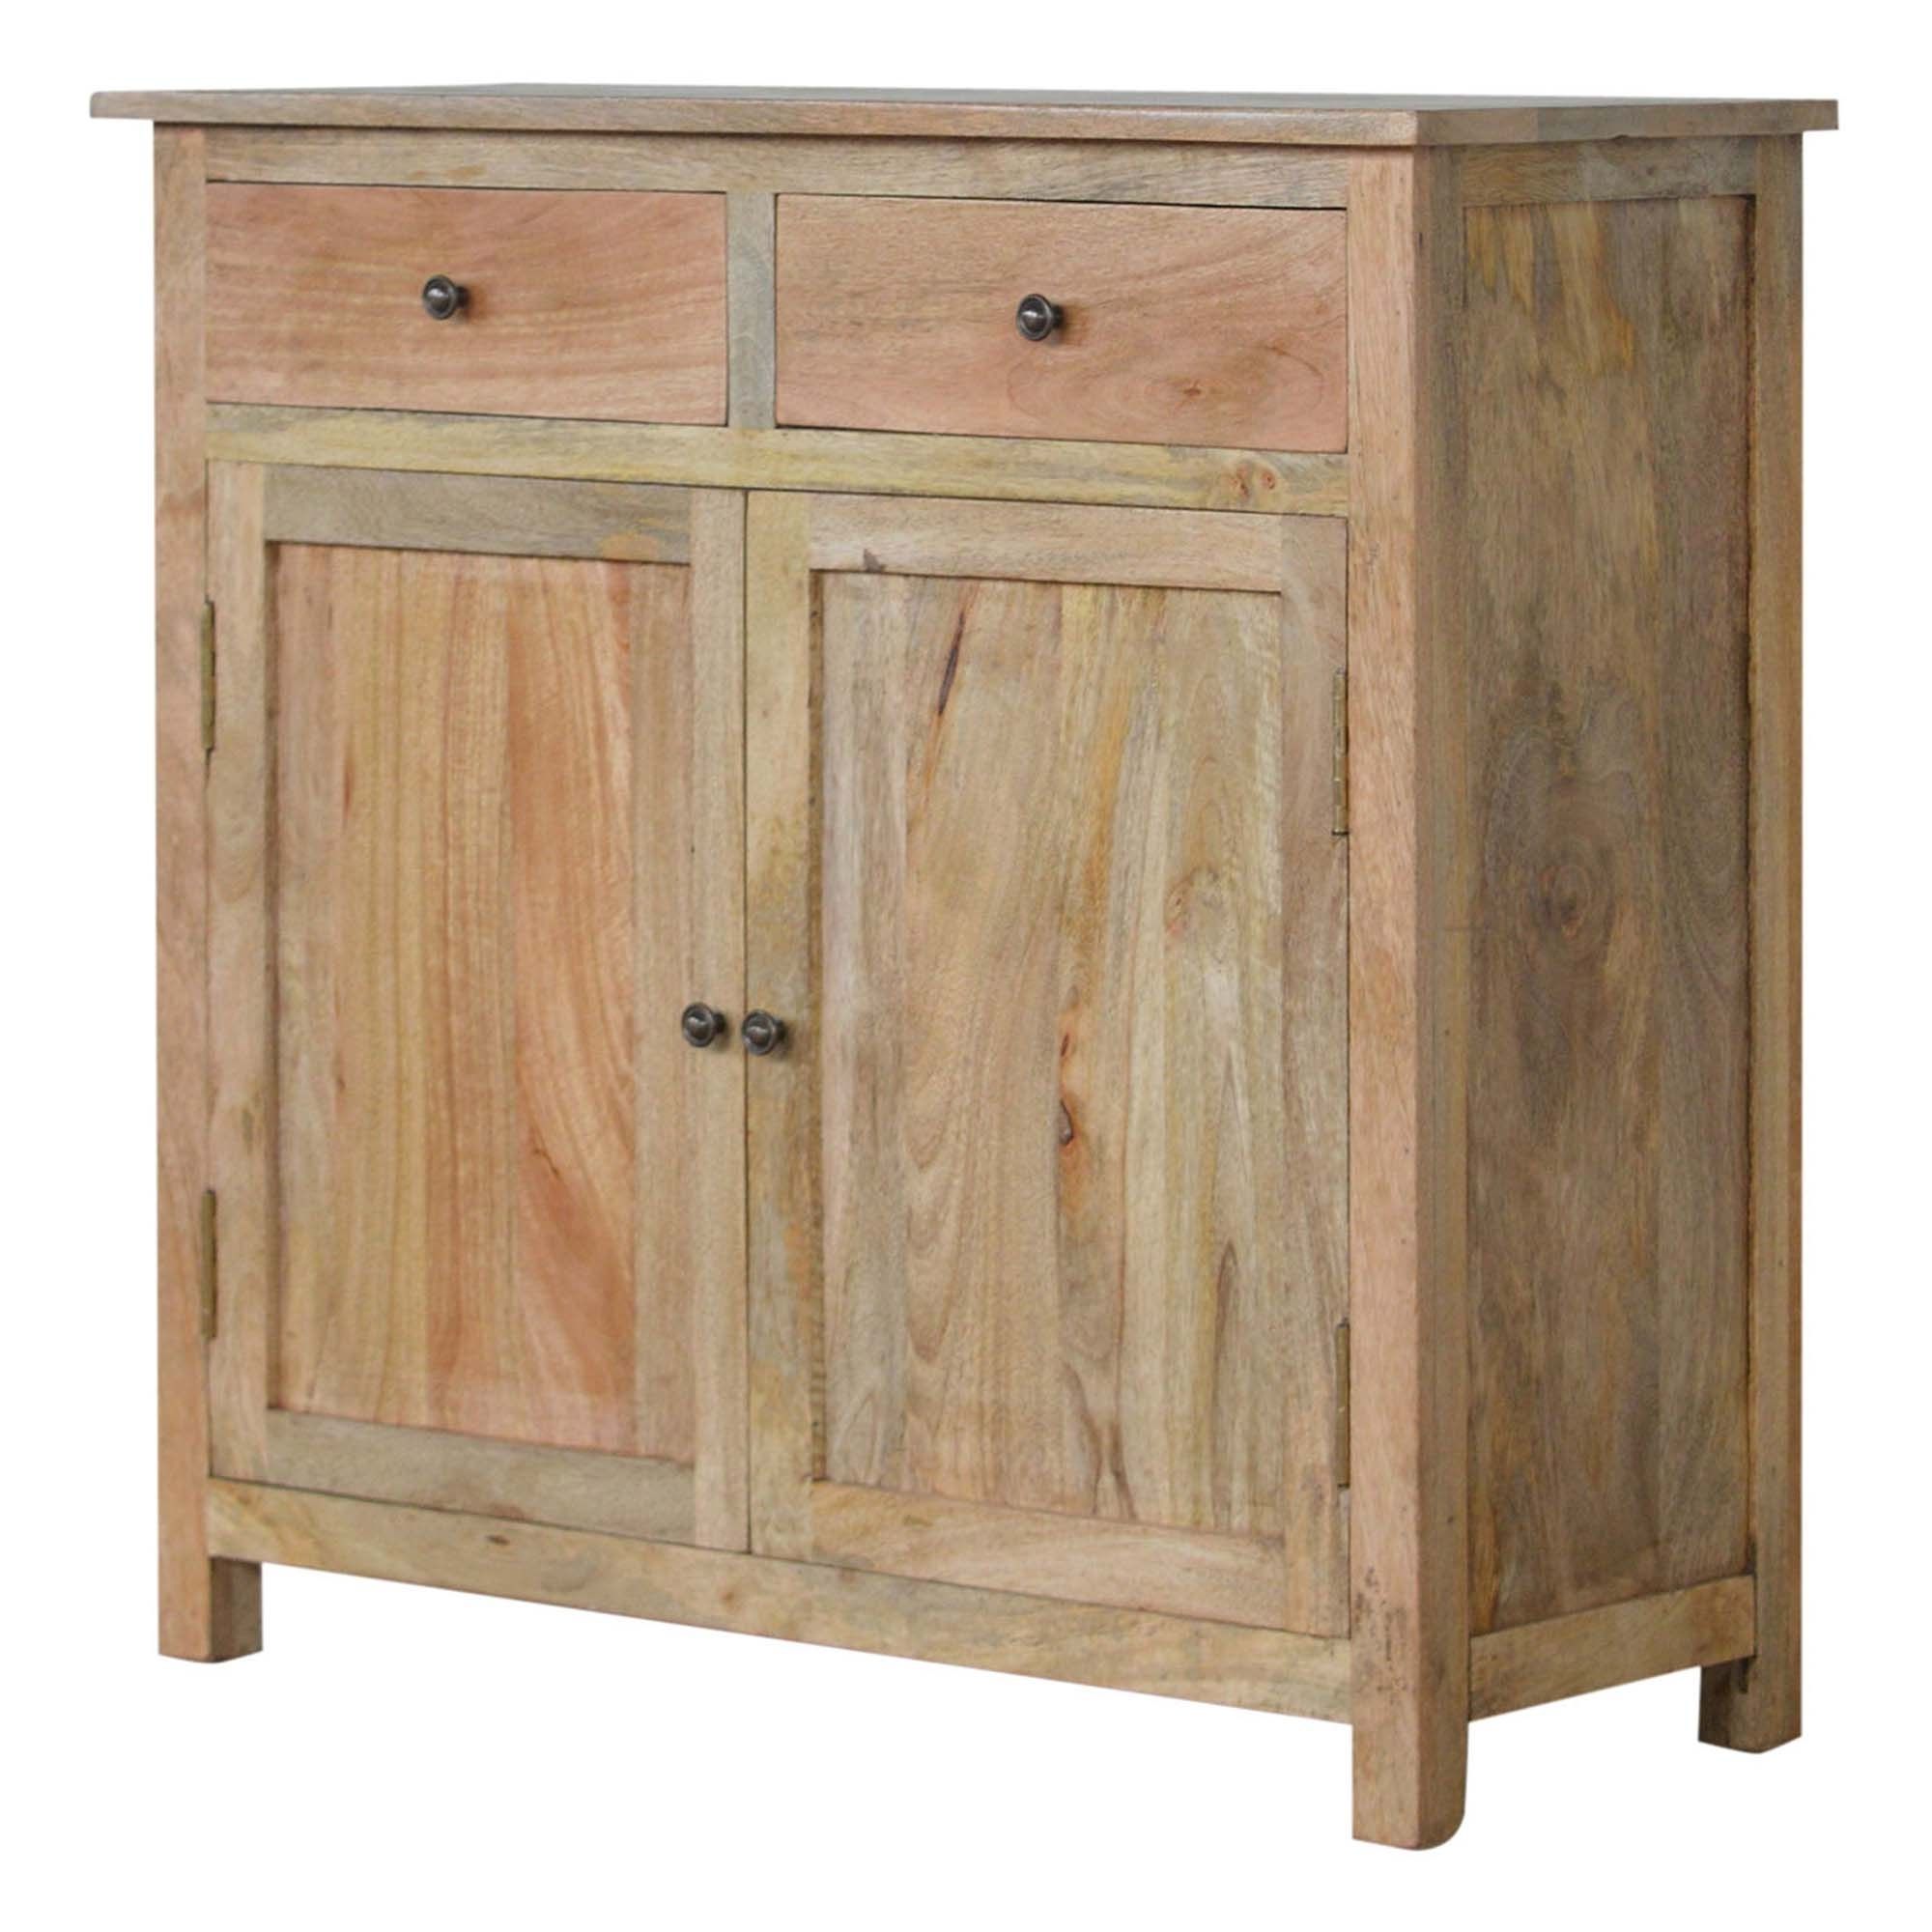 Homesdirect365 With Latest Mango Wood 2 Door/2 Drawer Sideboards (View 1 of 20)